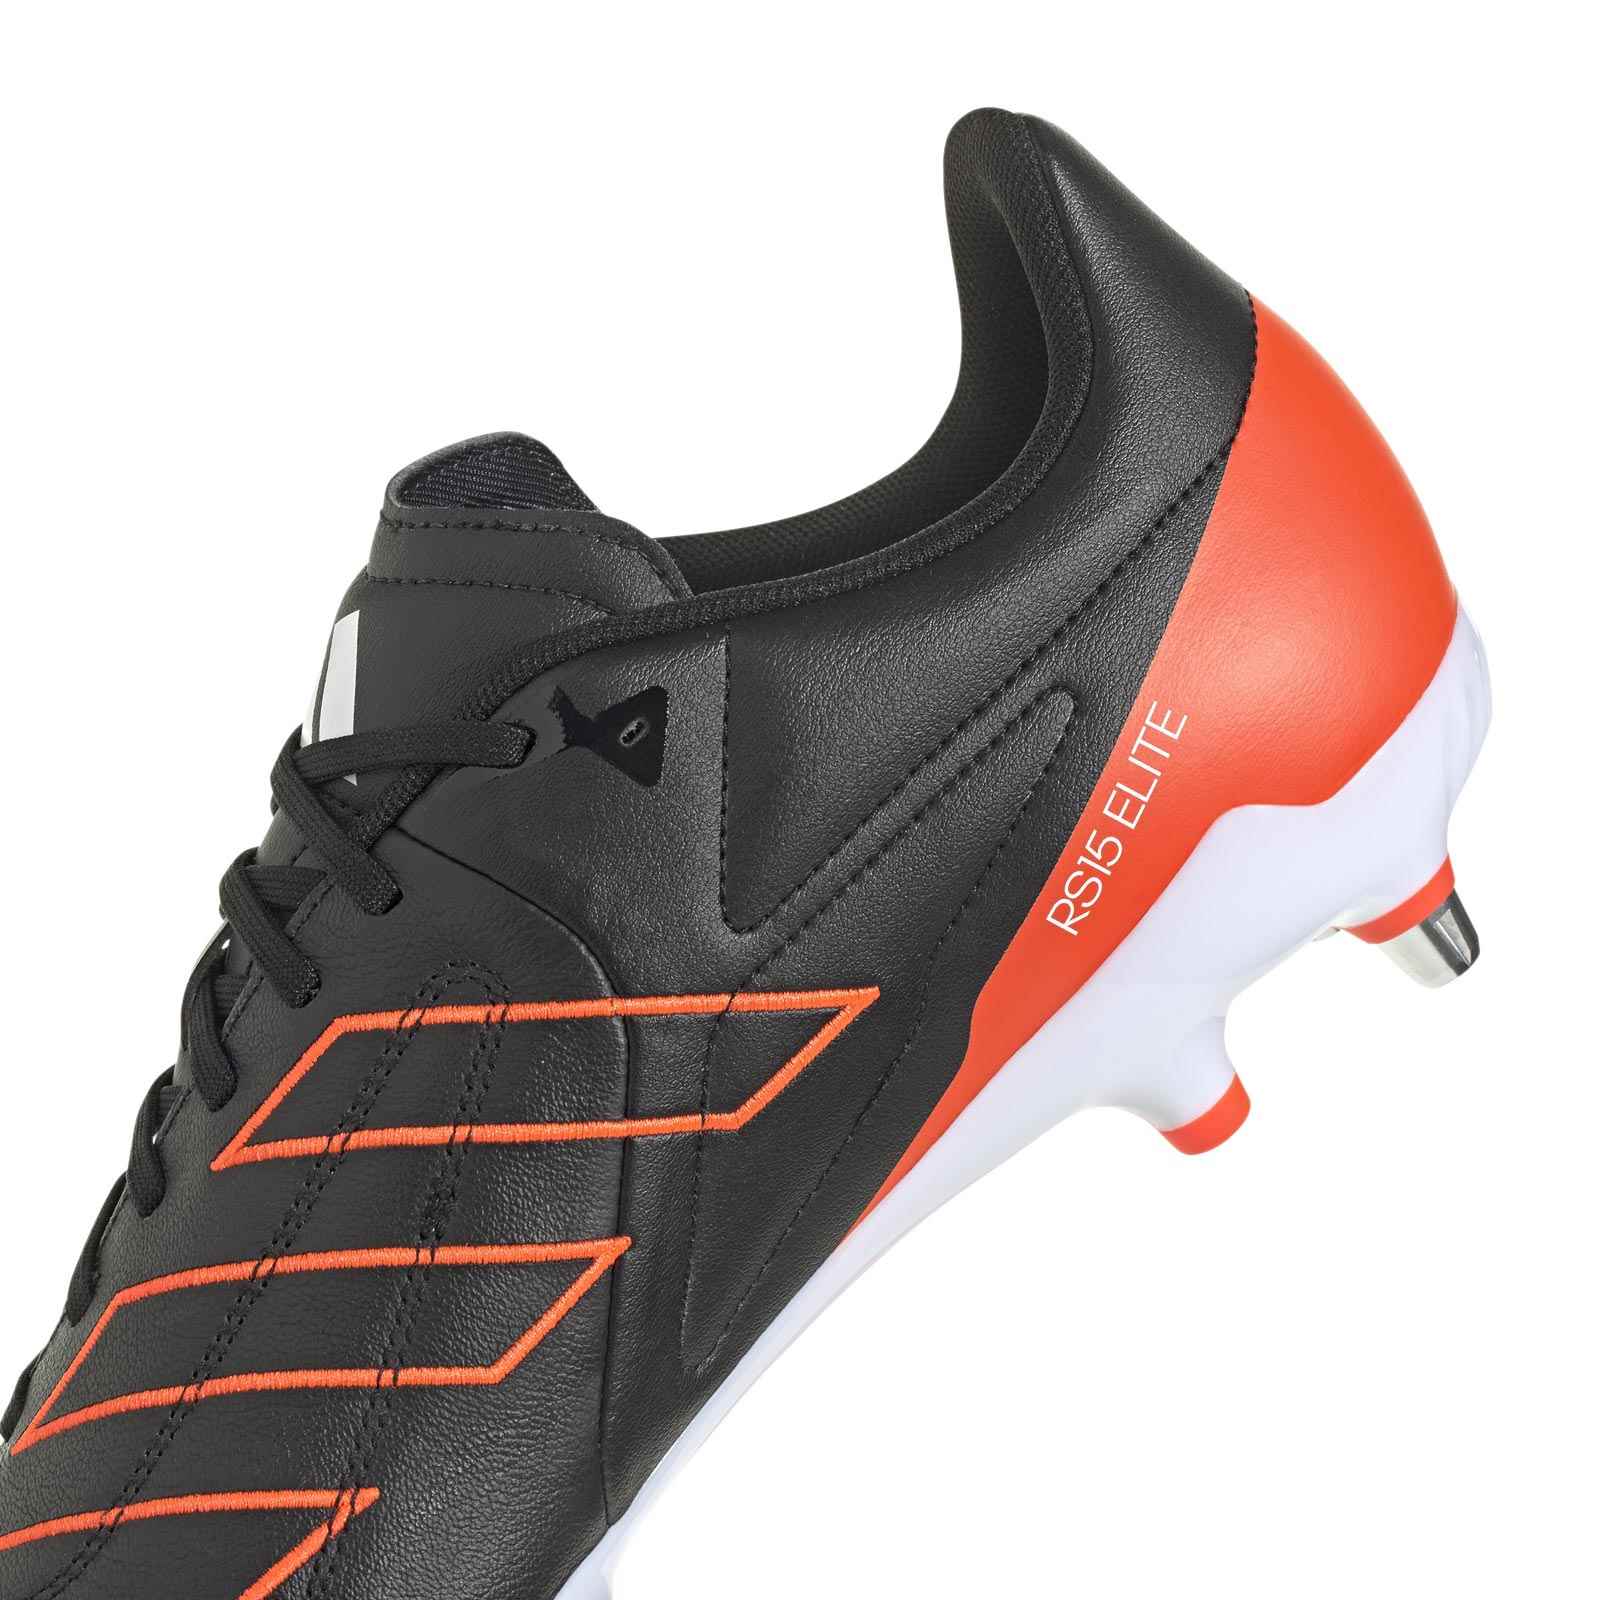 adidas Adizero RS15 Pro Soft Ground Rugby Boots | Adult Football Boots ...